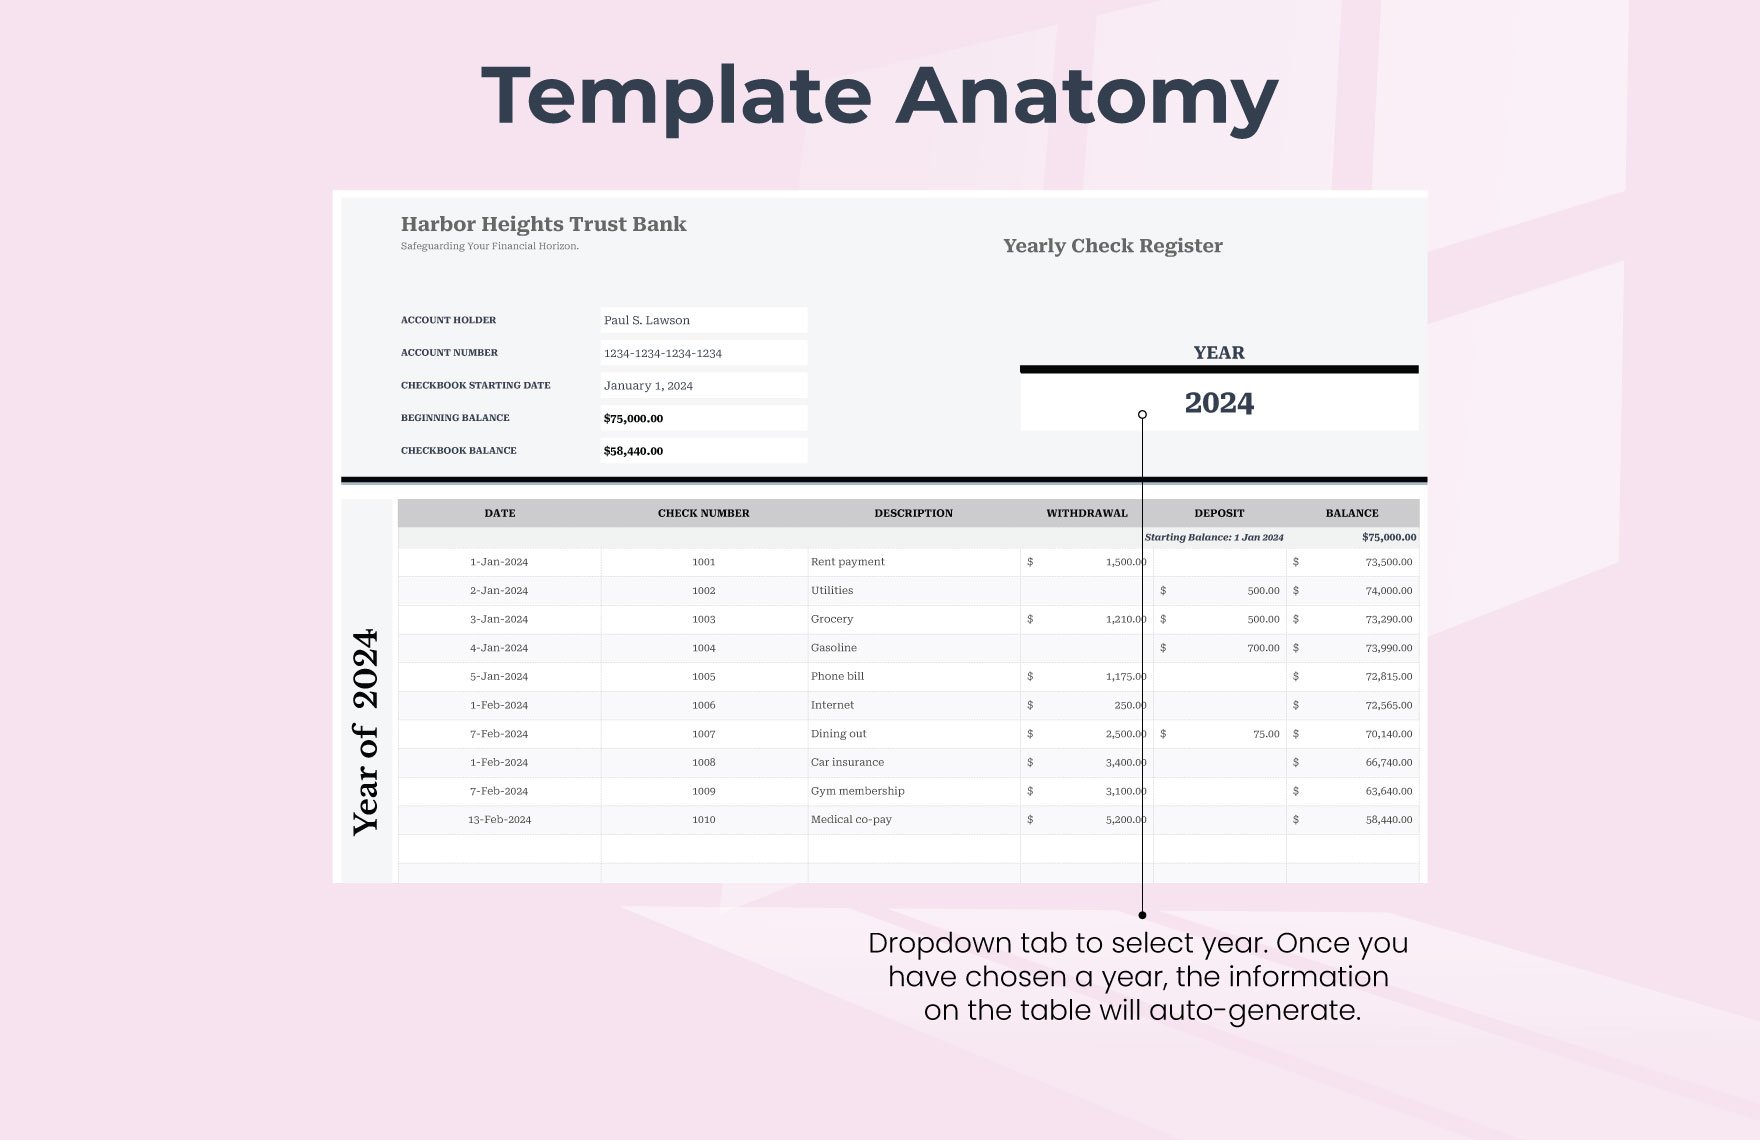 Yearly Check Register Template